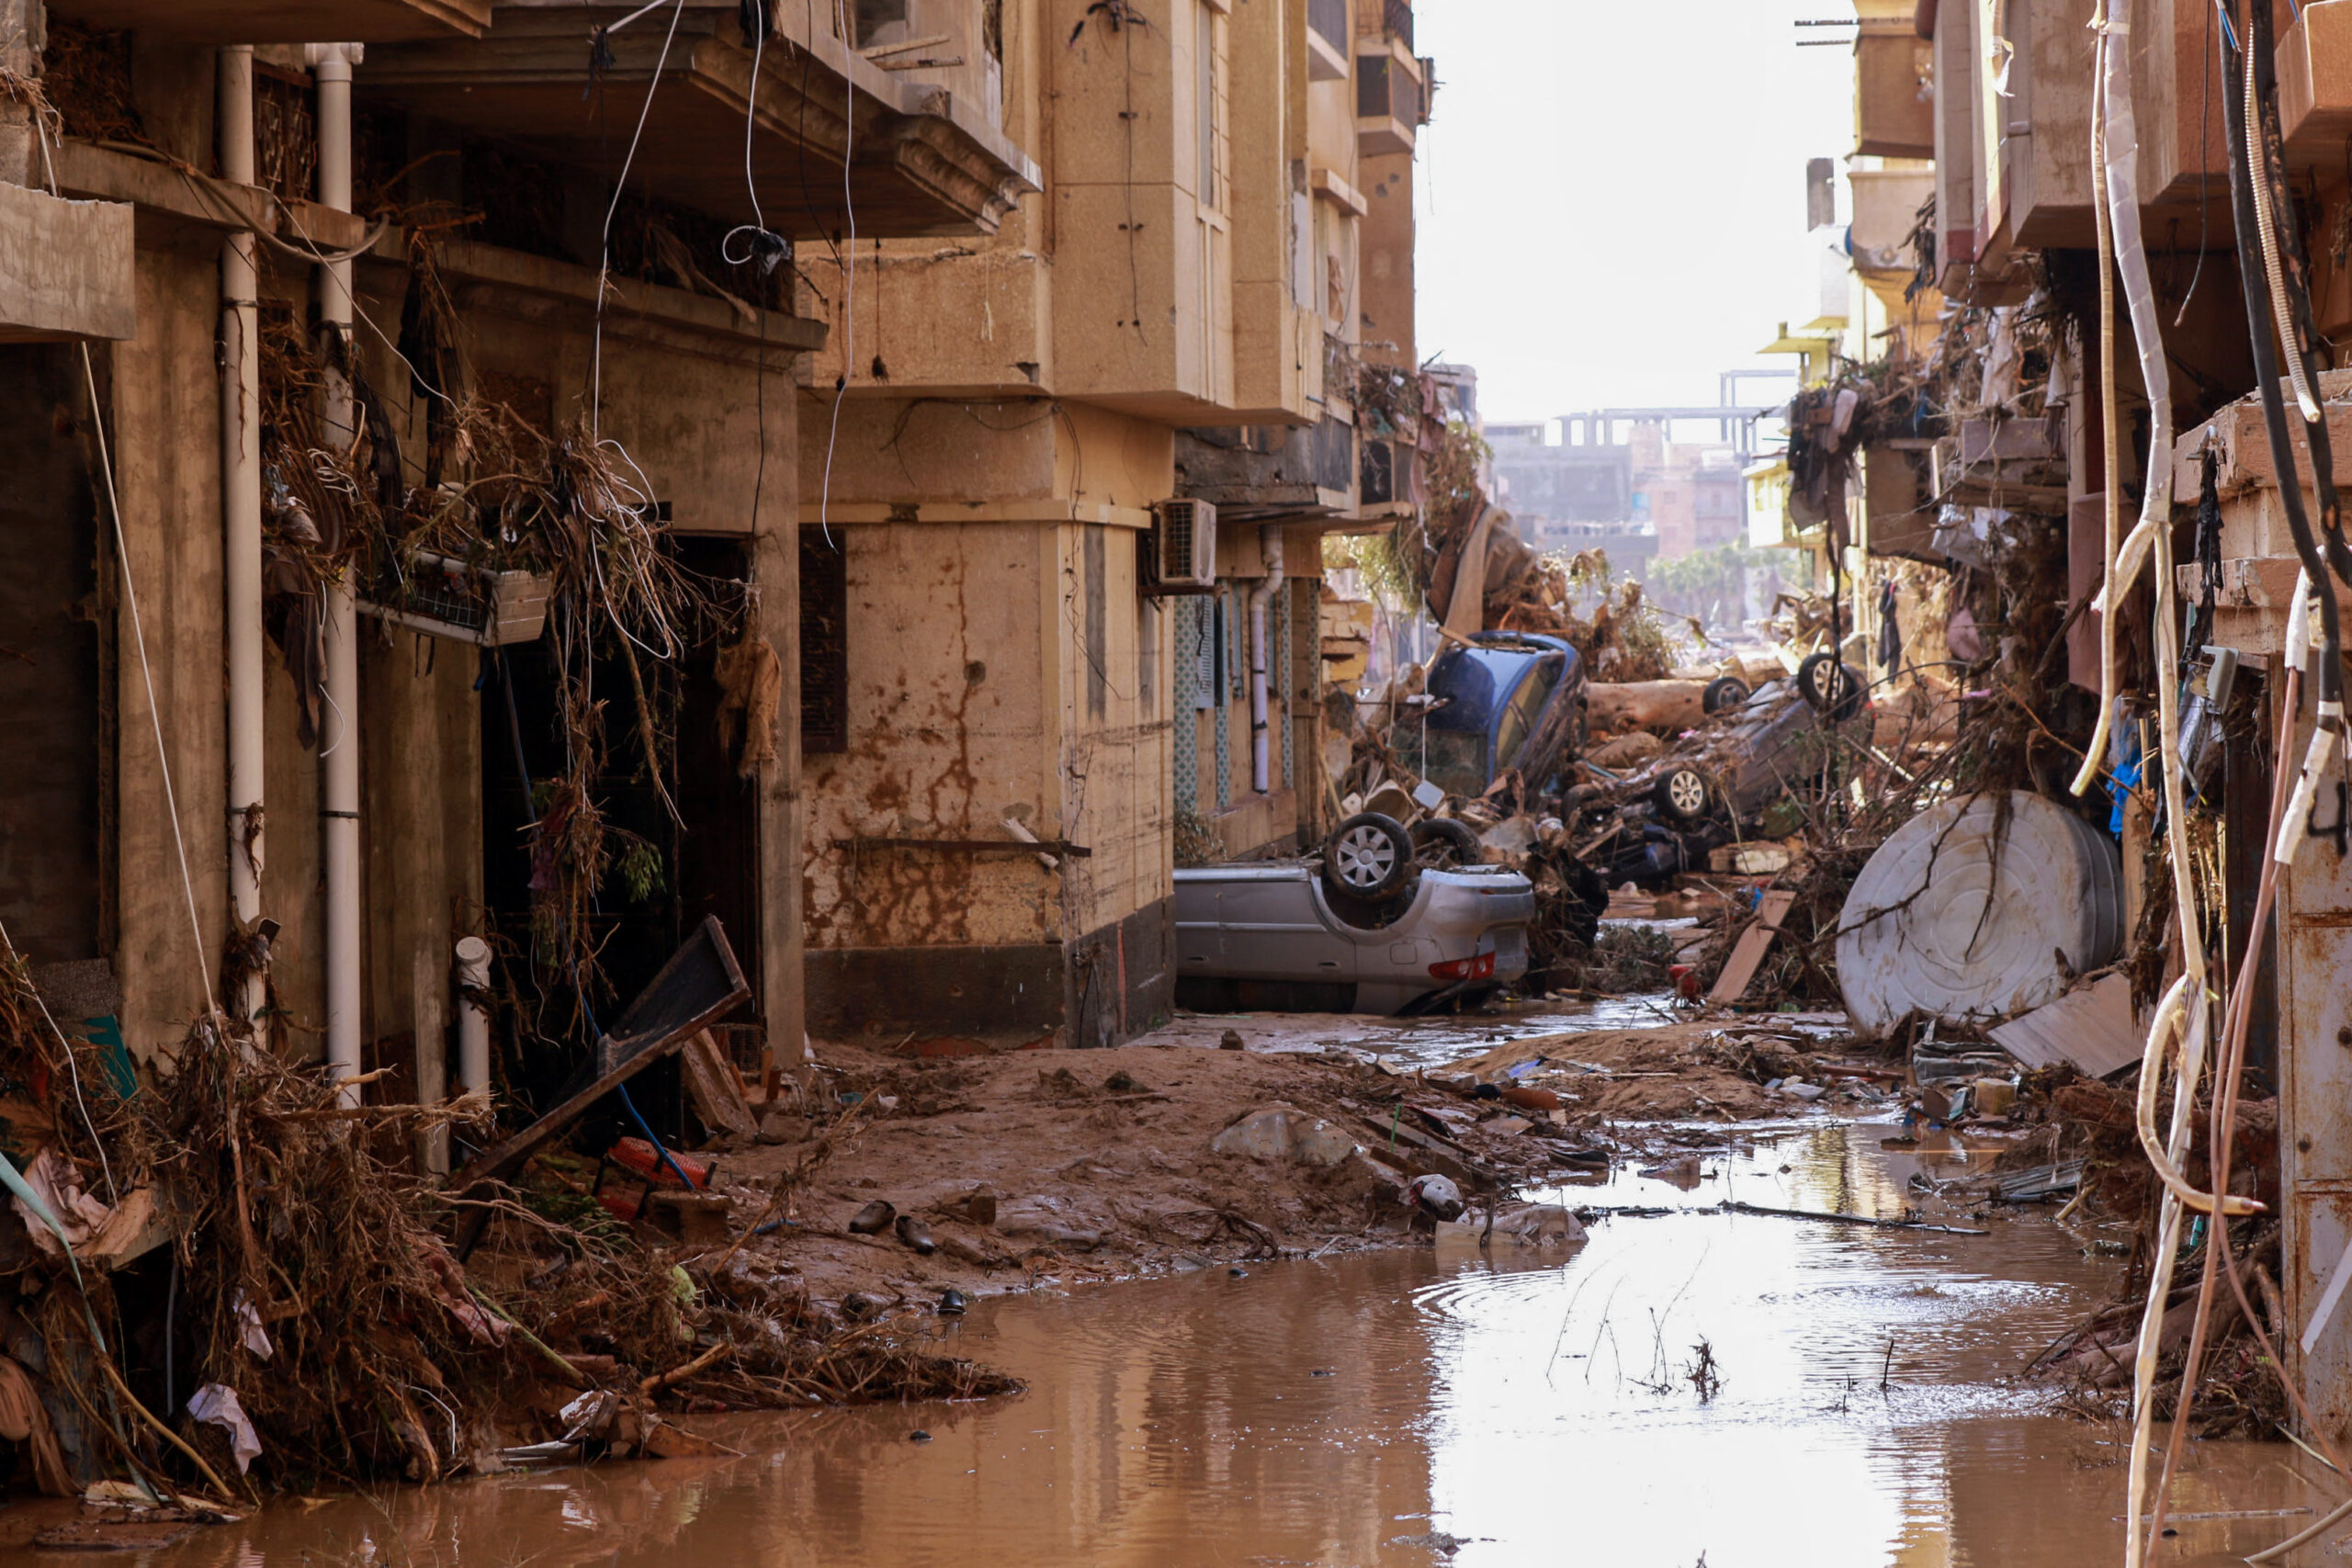 Tropical storm triggers deadly flash floods in Libya, claiming thousands of lives.